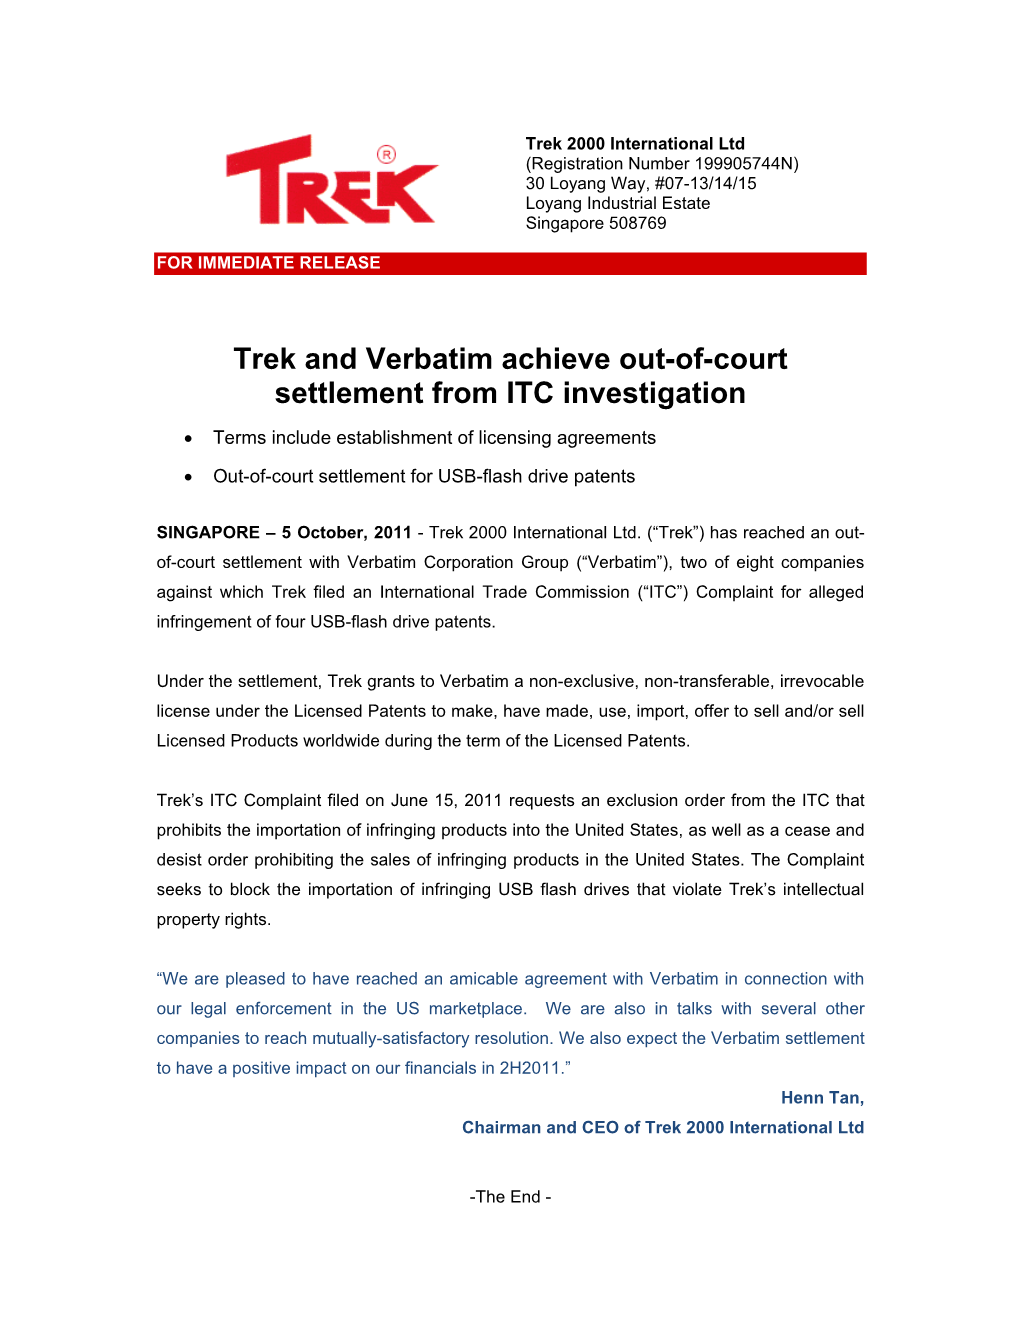 Trek and Verbatim Achieve Out-Of-Court Settlement from ITC Investigation